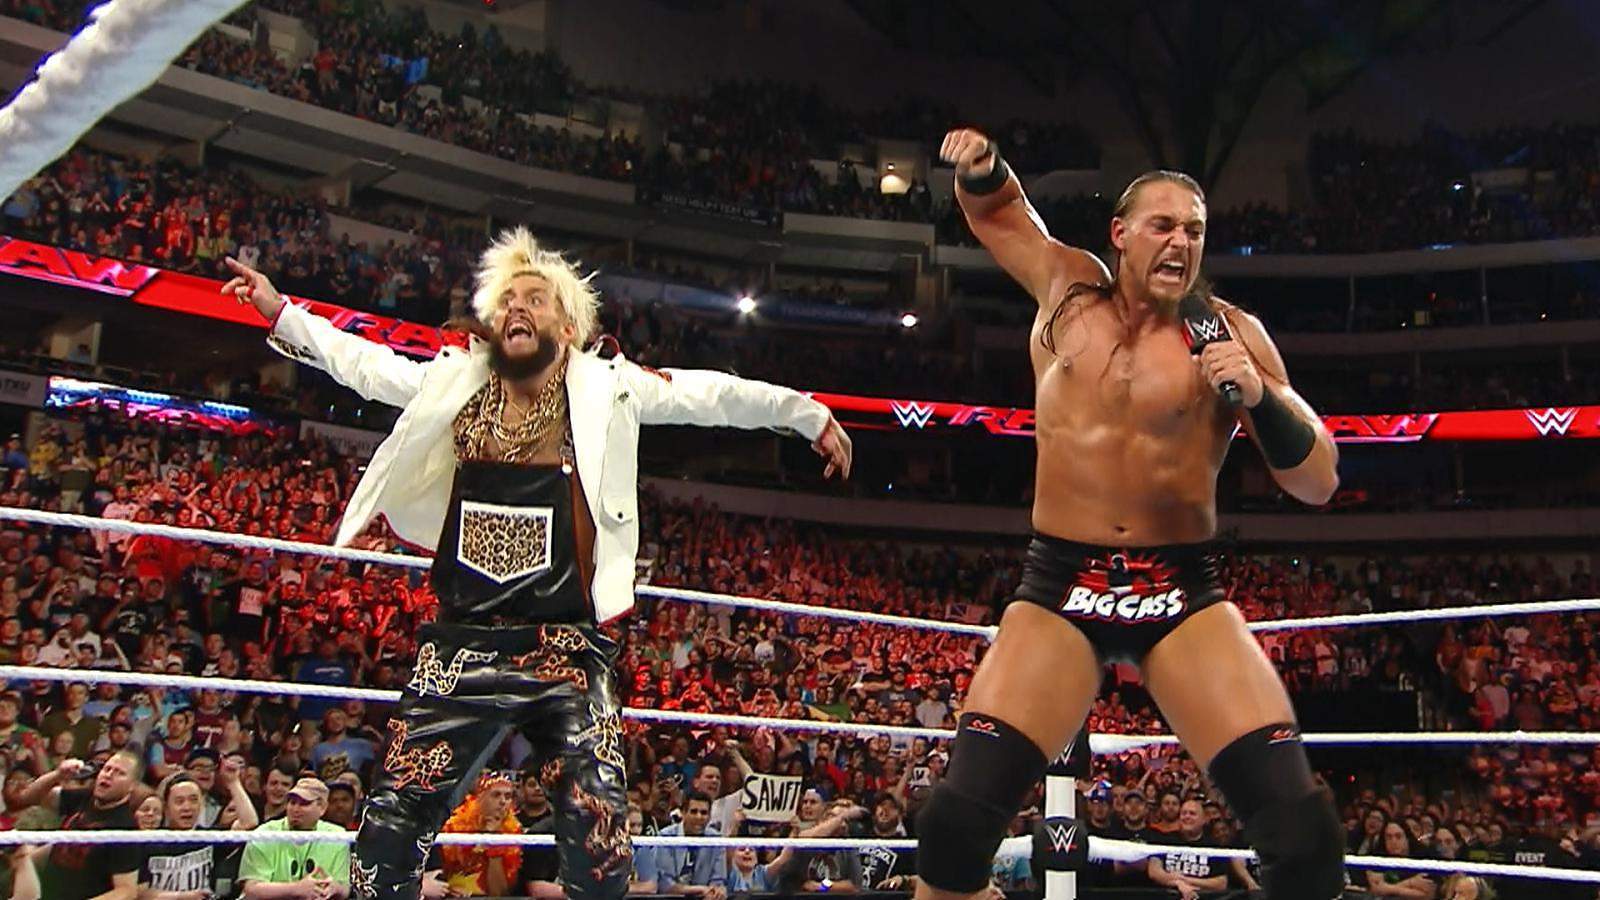 Enzo Amore SAWFT Wallpaper & image. Beautiful image HD Picture